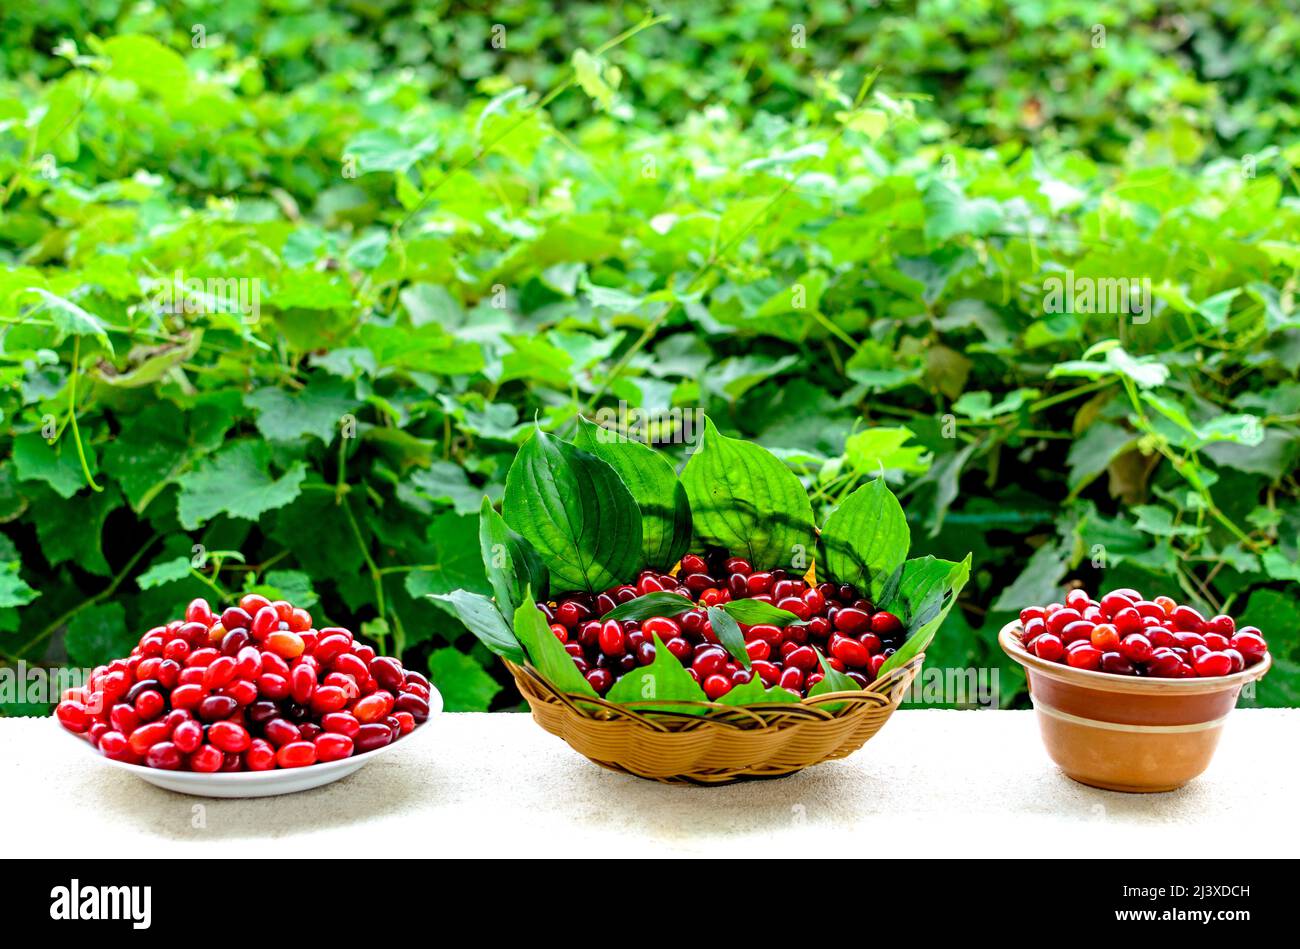 Red berries ripe dogwood in the basket with green leaves on the sides.Focus on berries Stock Photo